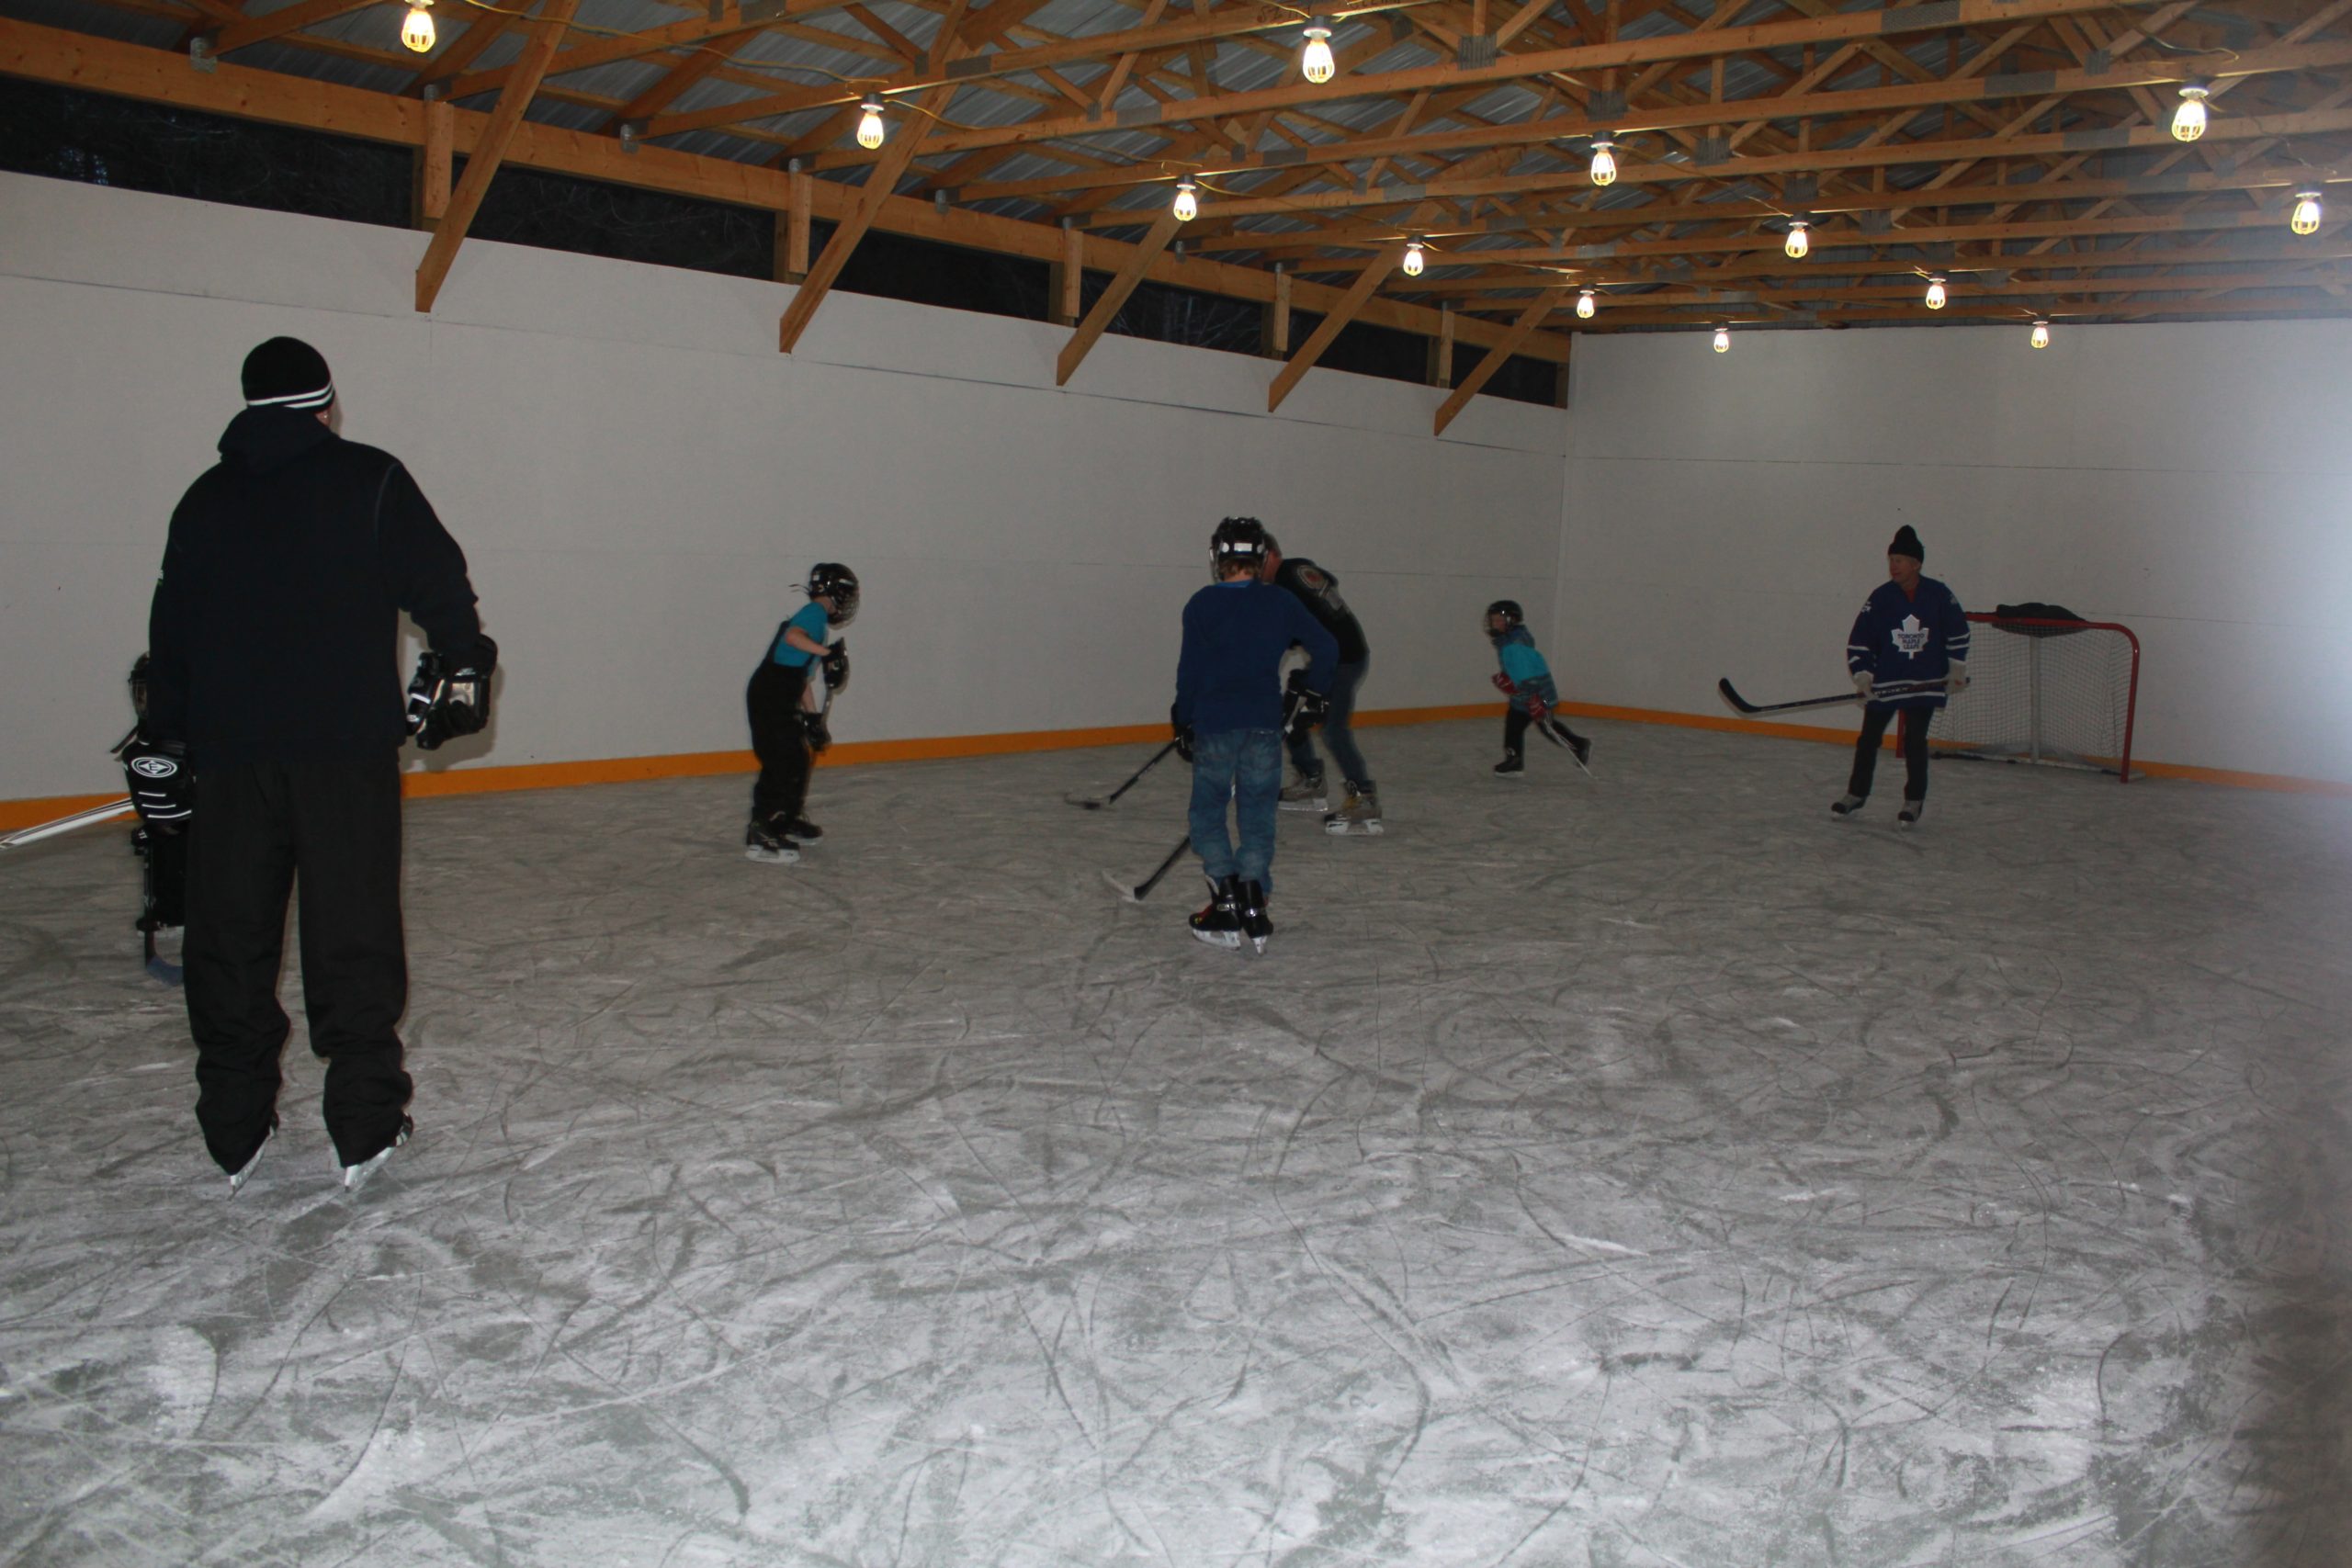 Refrigerated rink in a barn